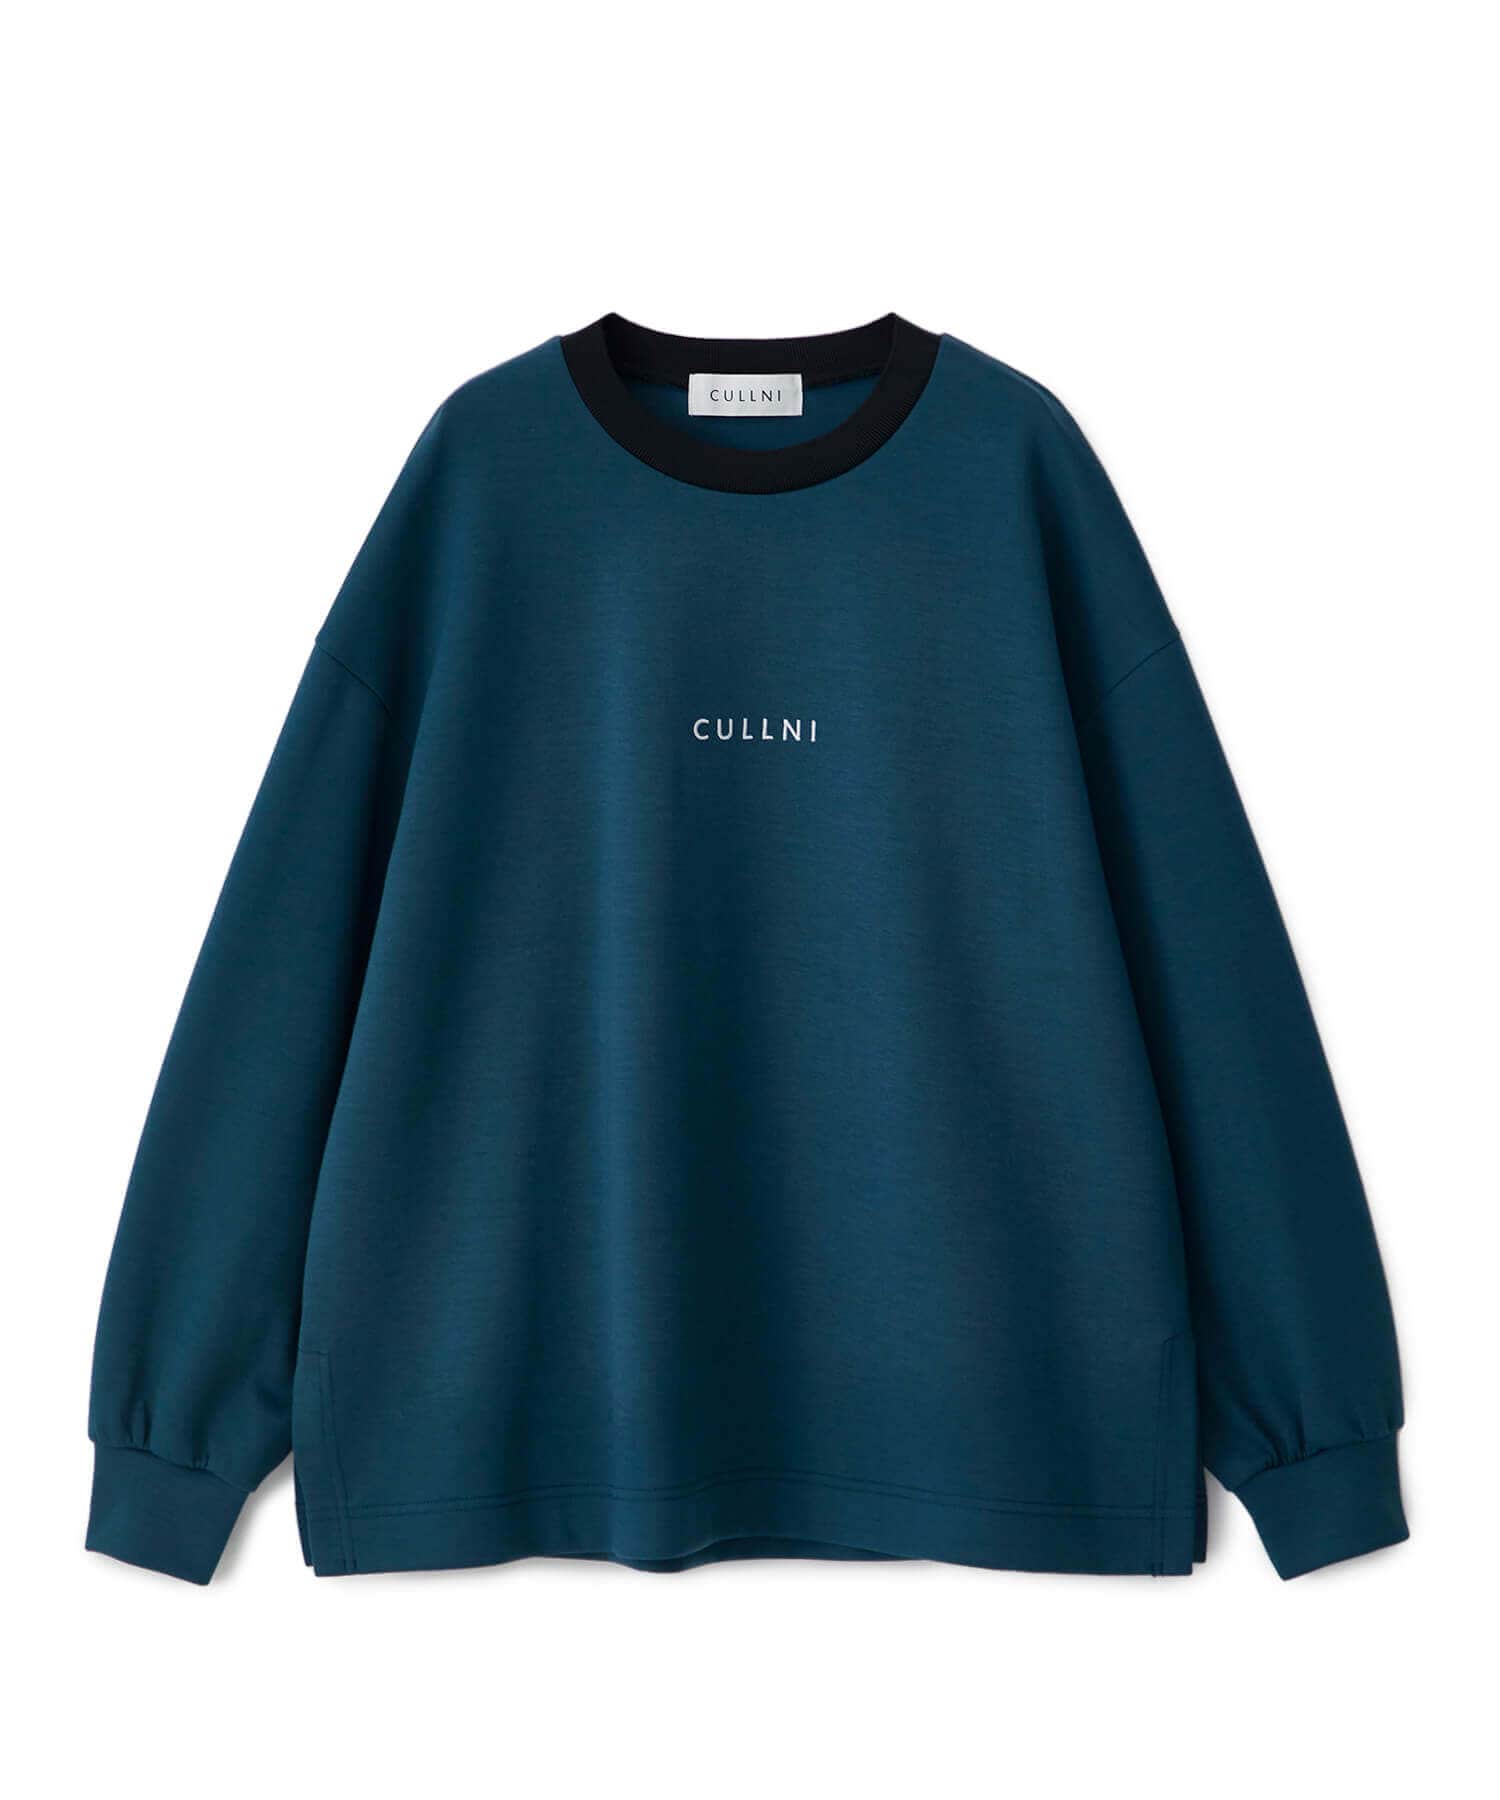 CULLNI 22SS EXCLUSIVE ｜ STUDIOUS MENS｜ STUDIOUS ONLINE公式通販サイト